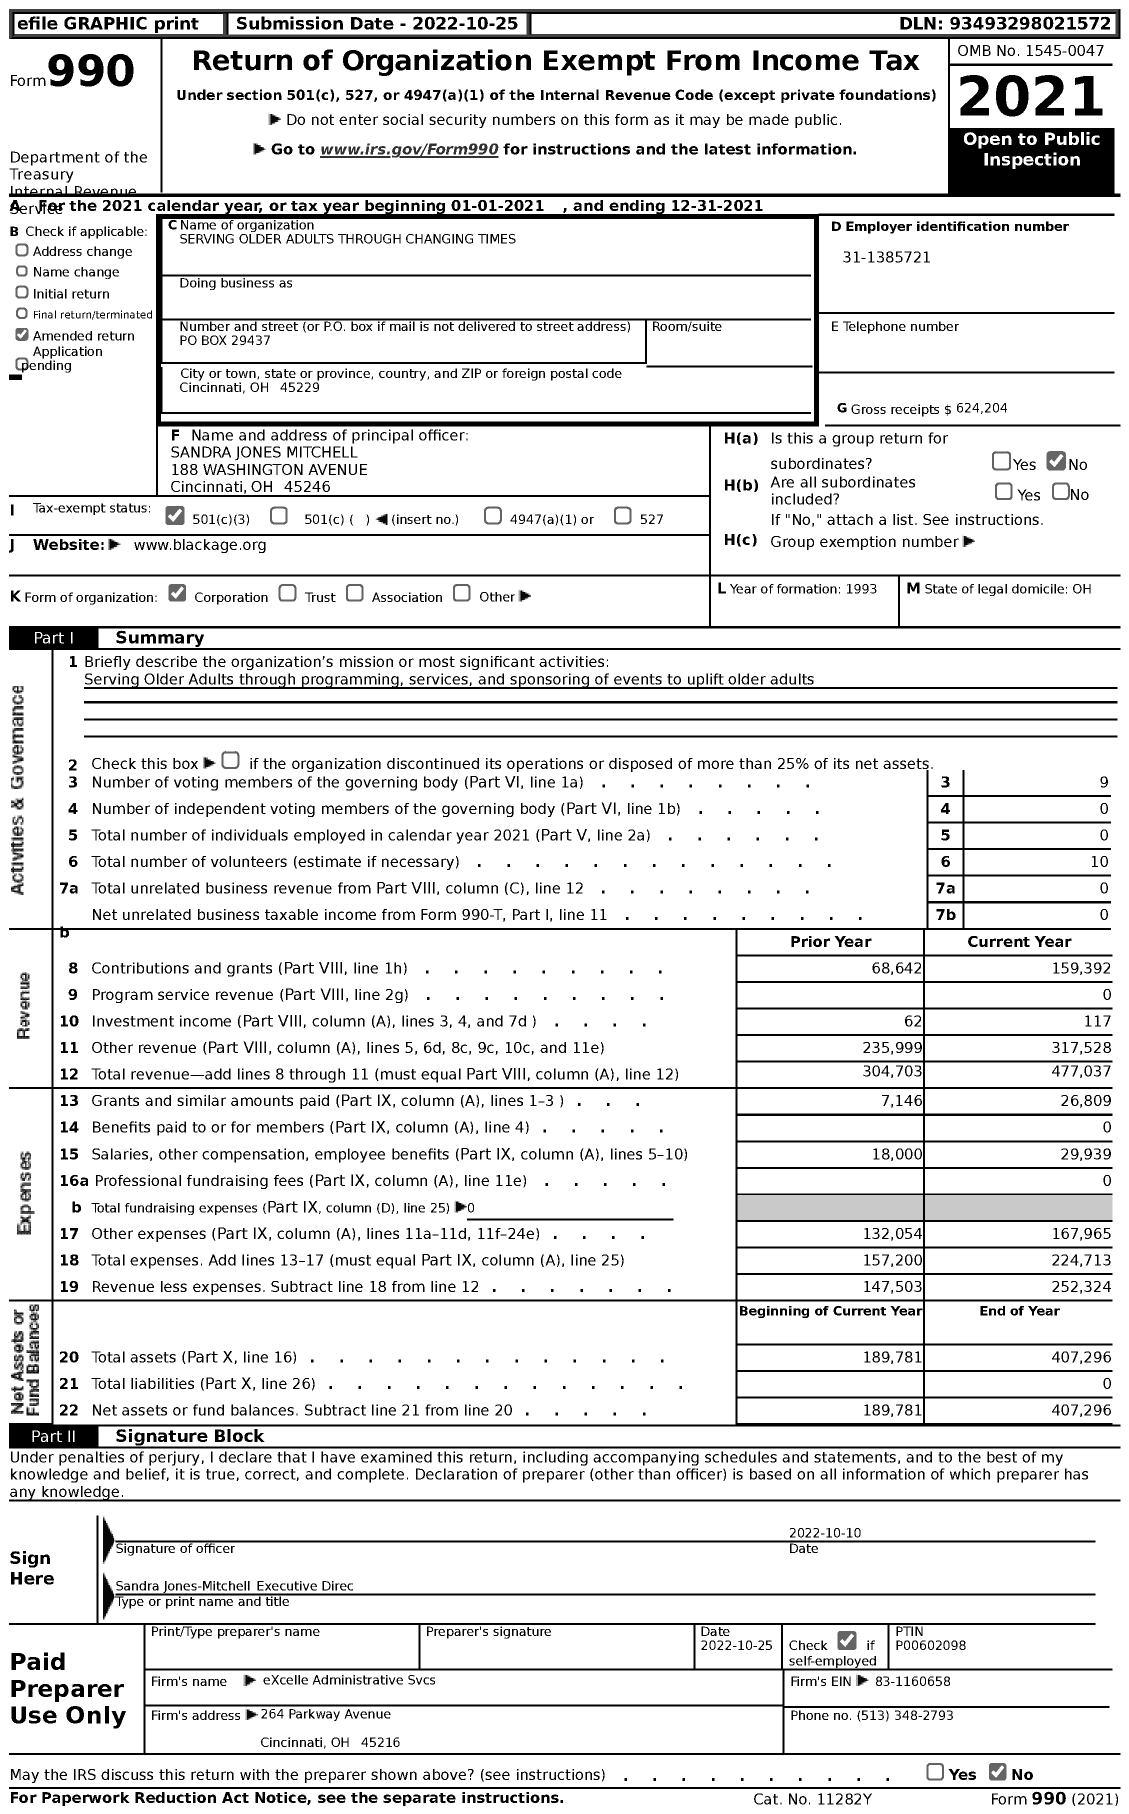 Image of first page of 2021 Form 990 for Serving Older Adults Through Changing Times